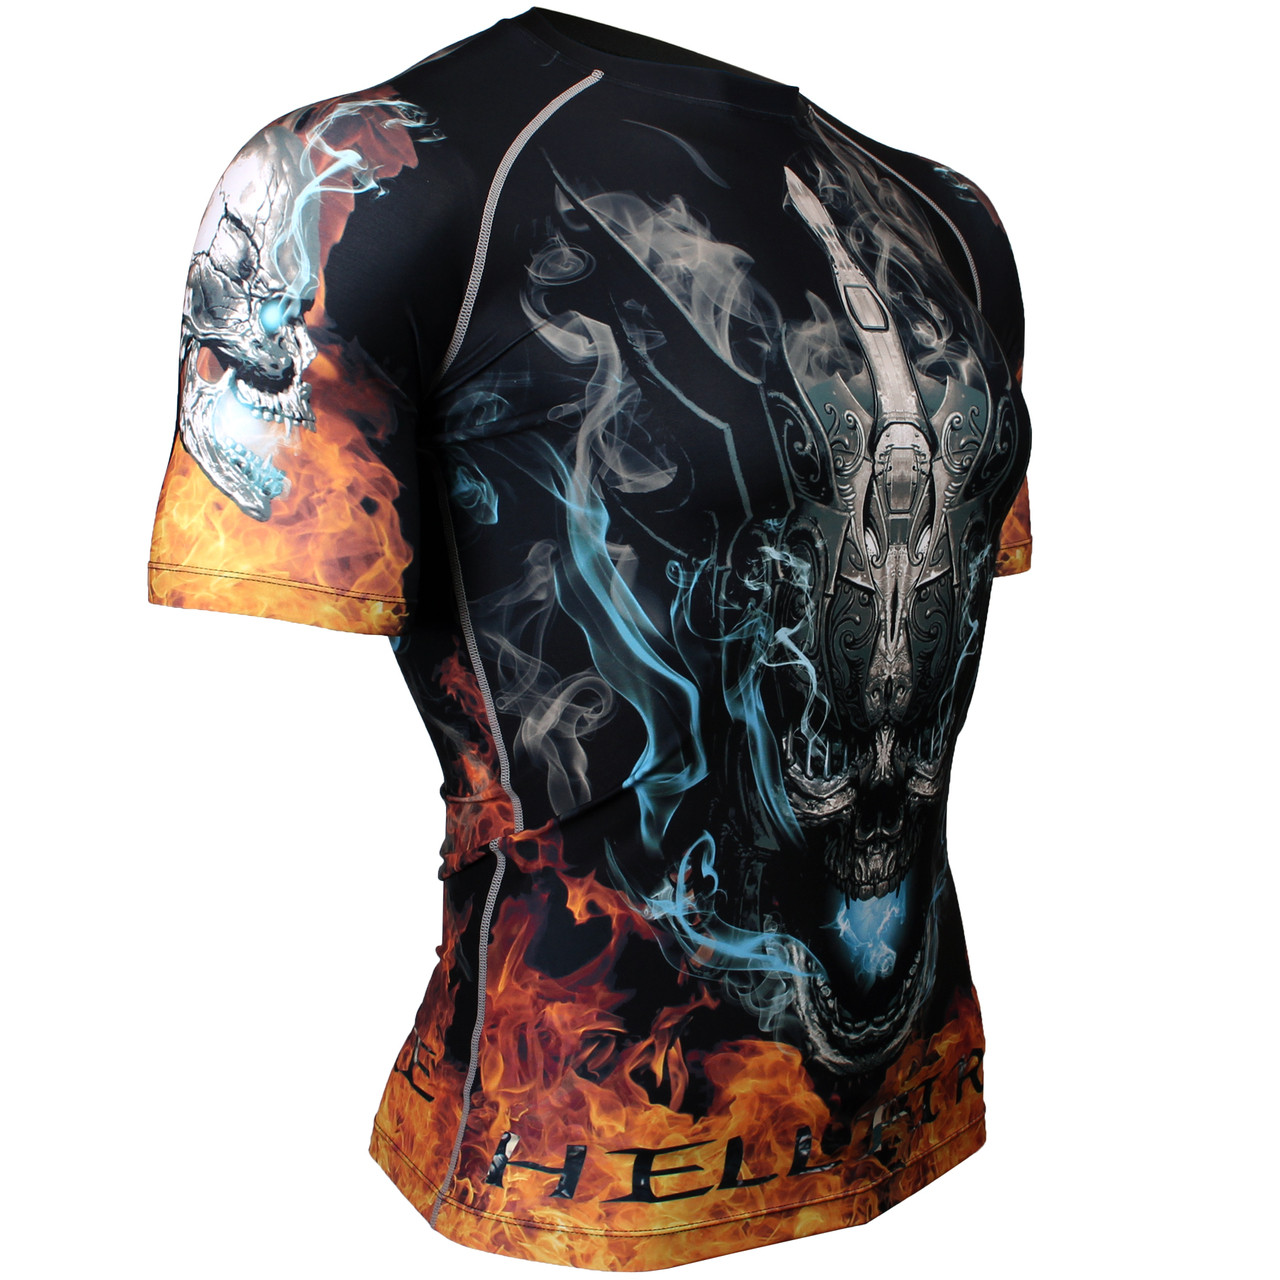 HELL FIRE [FX-320] Full graphic compression short sleeve shirt